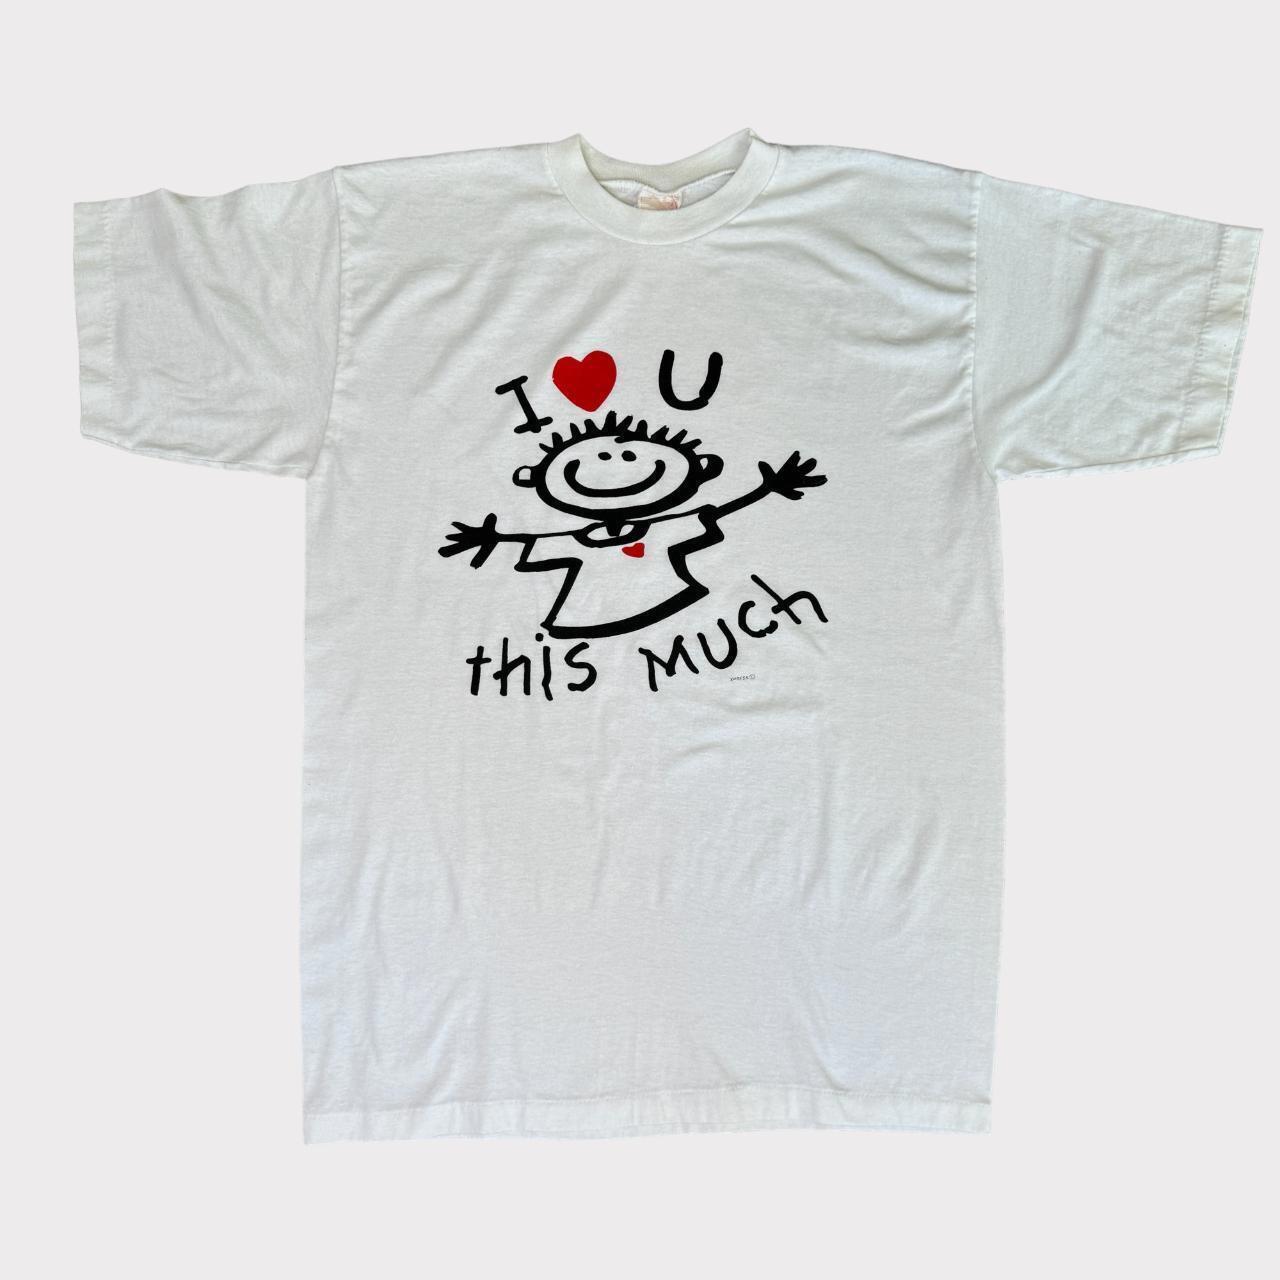 Vintage Rare \'I Love You This Much\' T-Shirt w/ Stick Man Drawing- Single Stitch